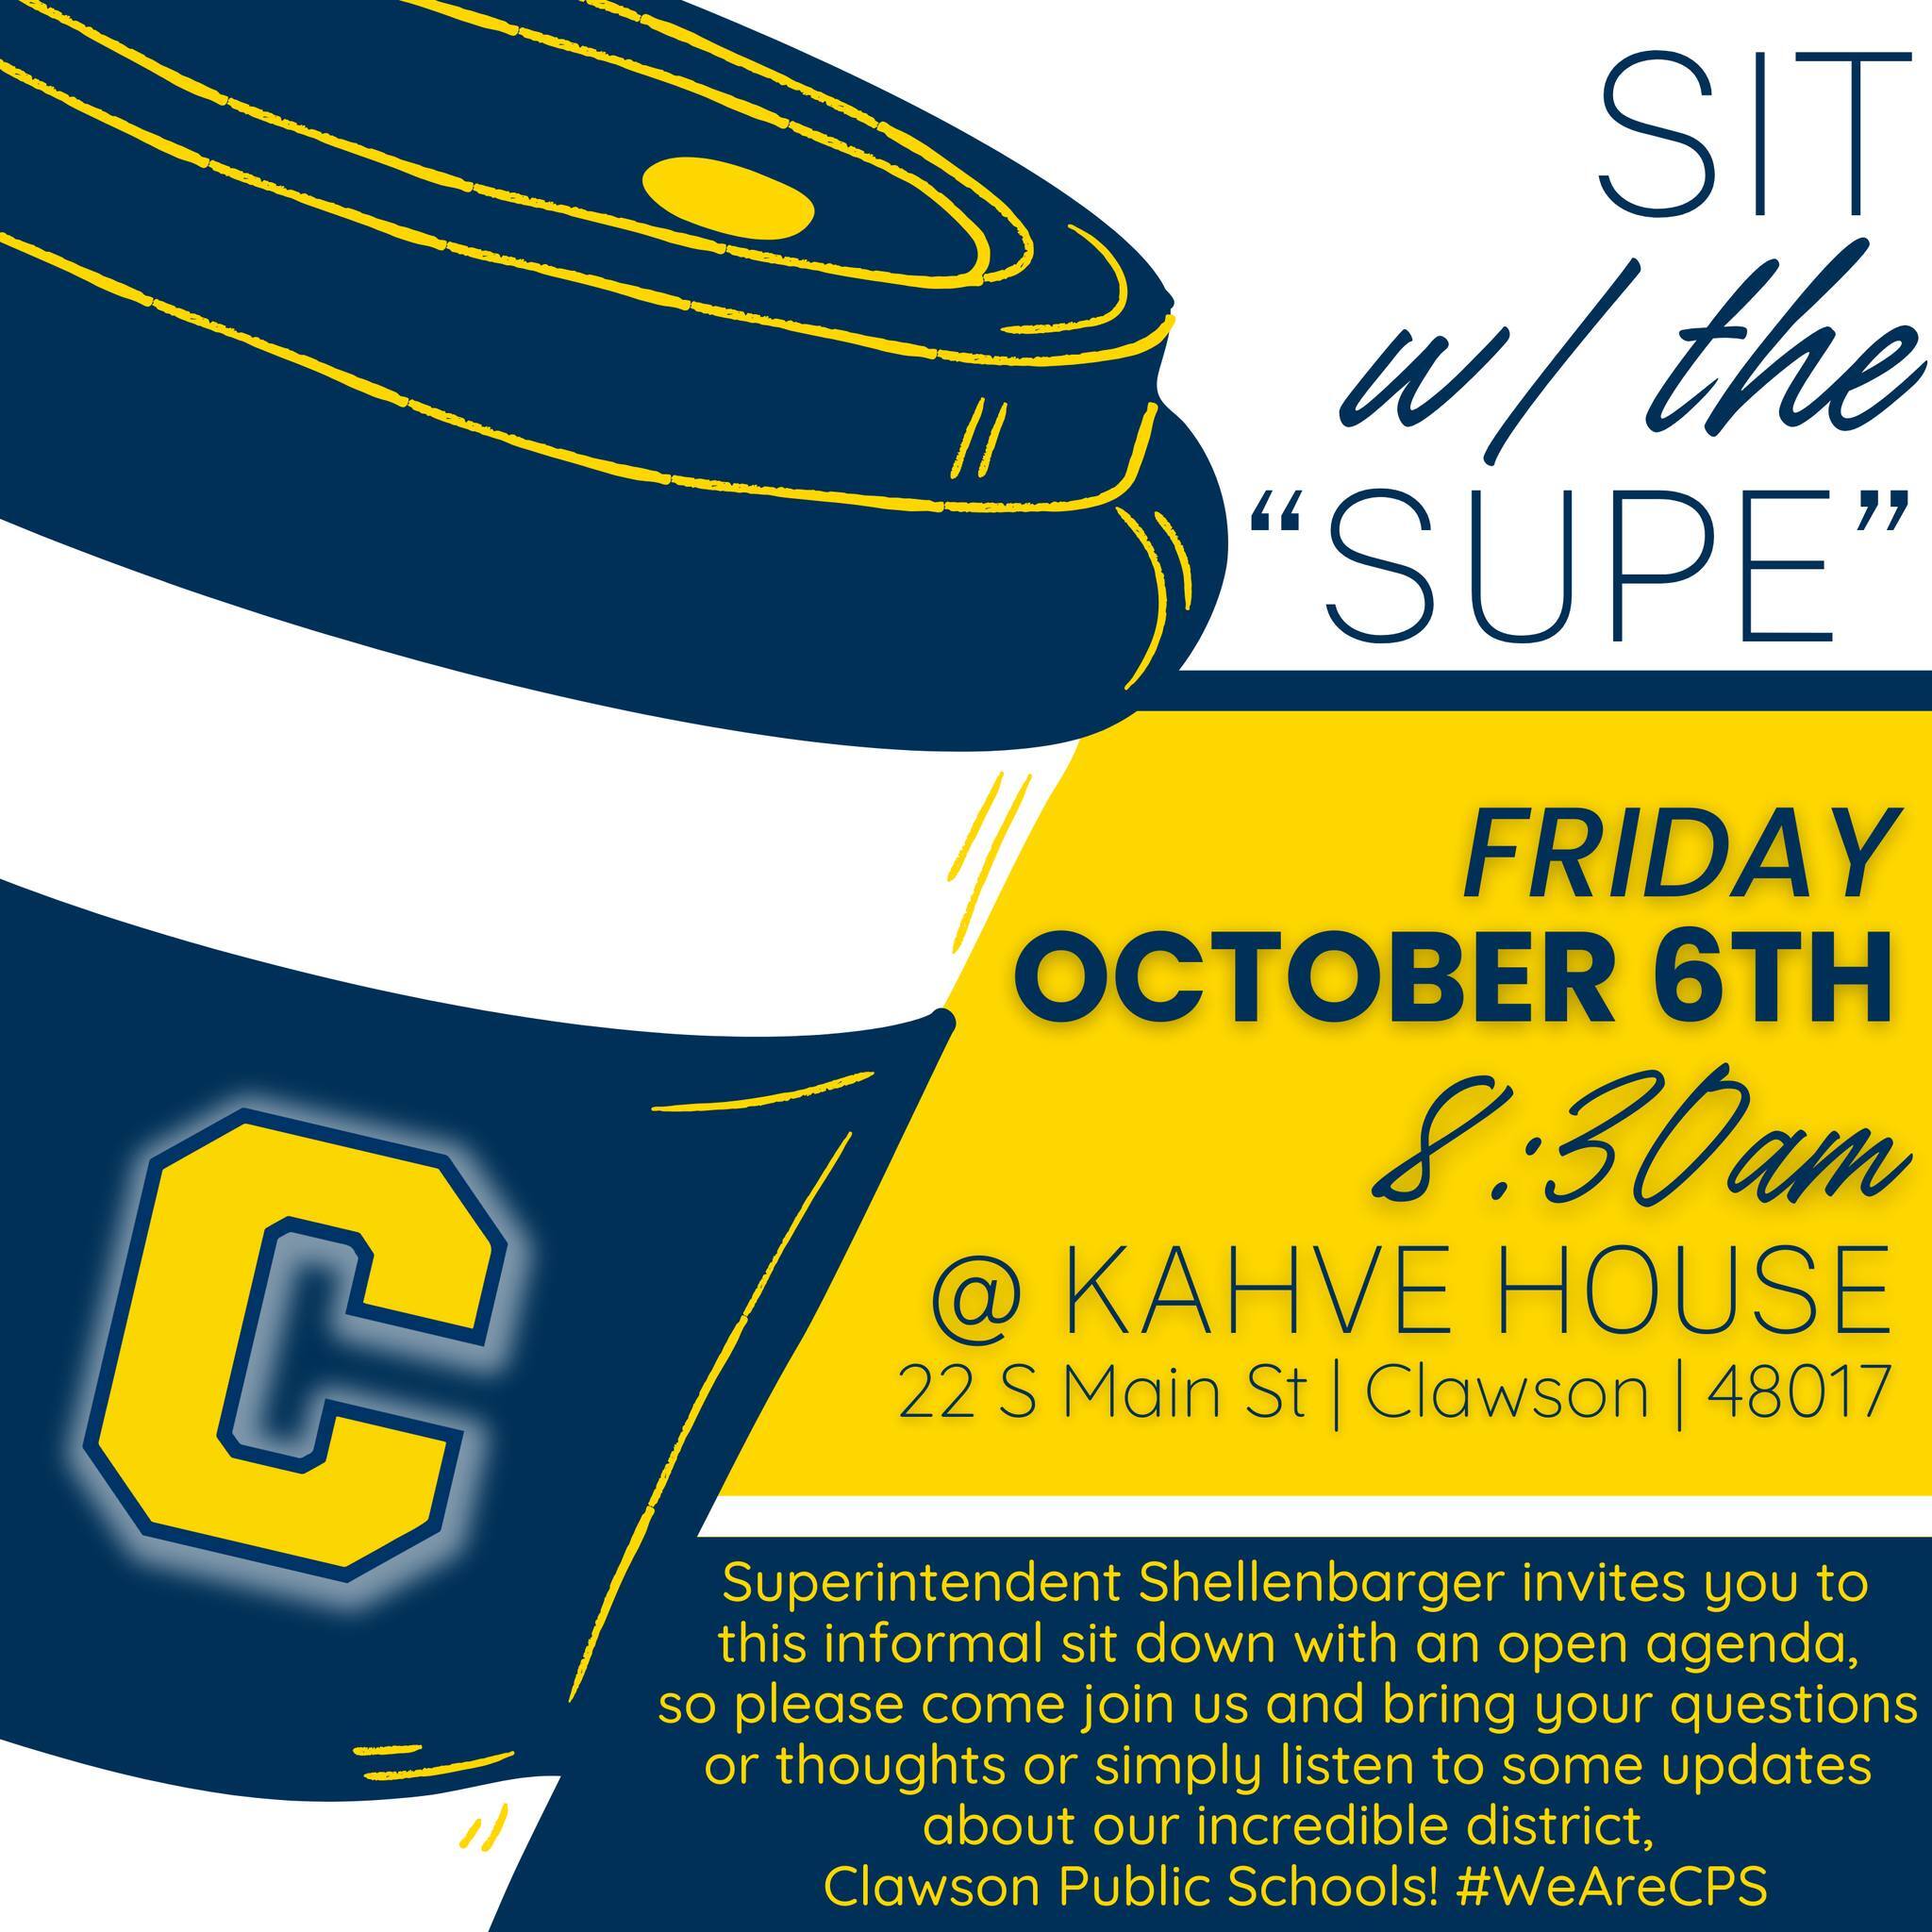 Sit with the Supe on Friday, October 6th at 8:30am at Kahve House 22 South Main Street, Clawson, MI 48017; Superintendent Shellenbarger invites you to this informal sit down with an open agenda, so please come join us and bring your questions or thoughts or simply listen to some updates about our incredible district. Clawson Public Schools #WeAreCPS 